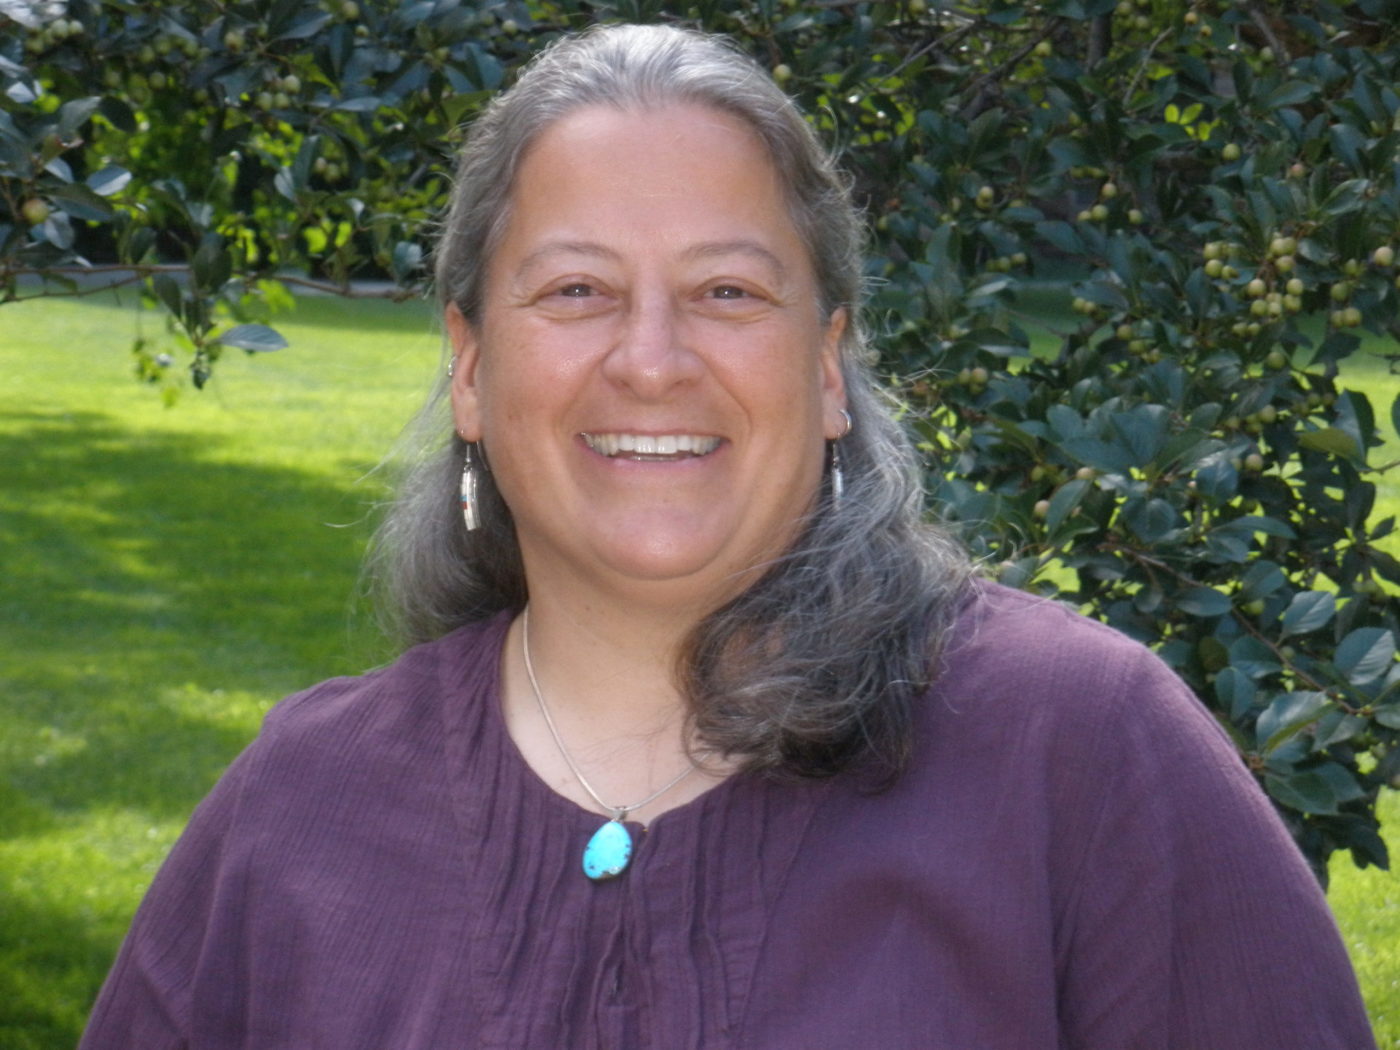 A picture of Doreen from the chest up. She is a middle-aged woman with collarbone-length gray hair and a full-toothed smile. She wears a purple blouse, dangle earrings, and a turquoise necklace.